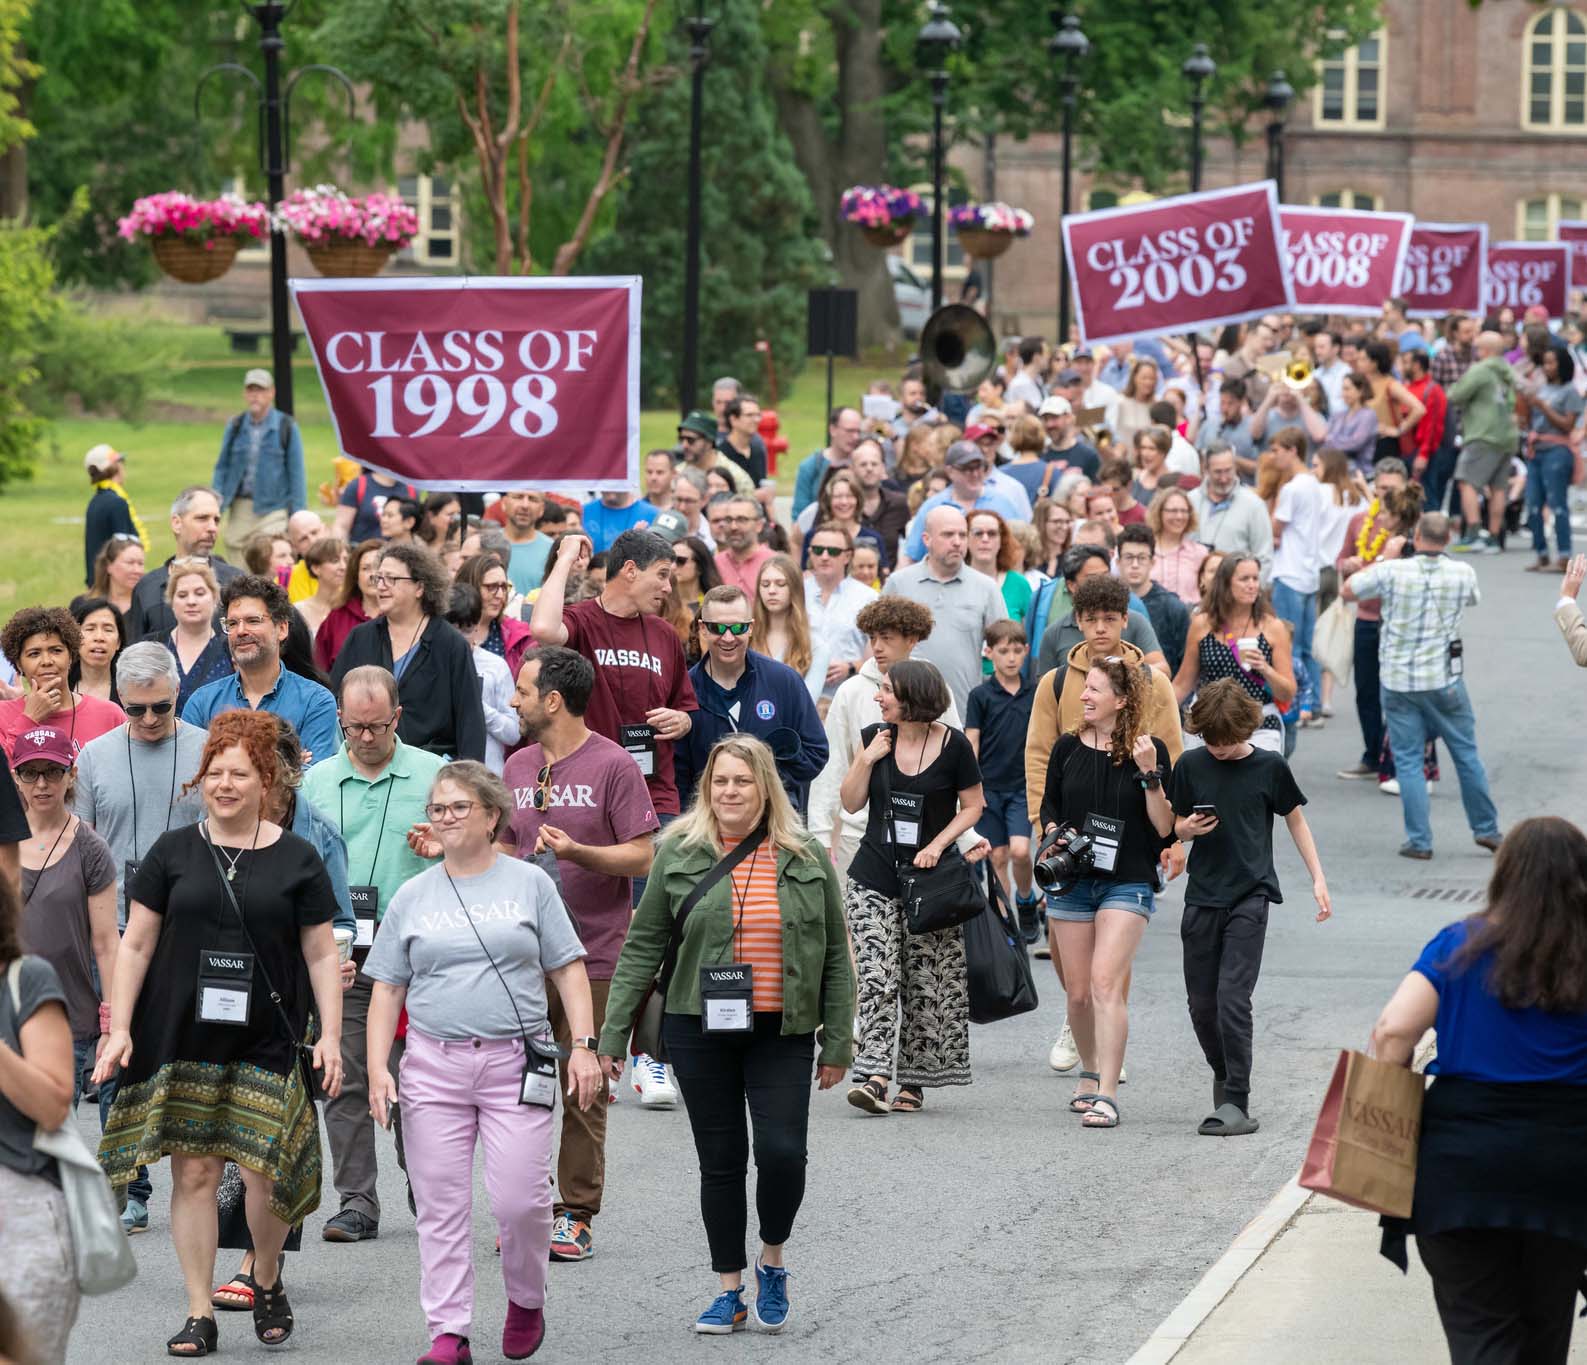 A large group of people walking along a campus road, with some banners displaying class years.